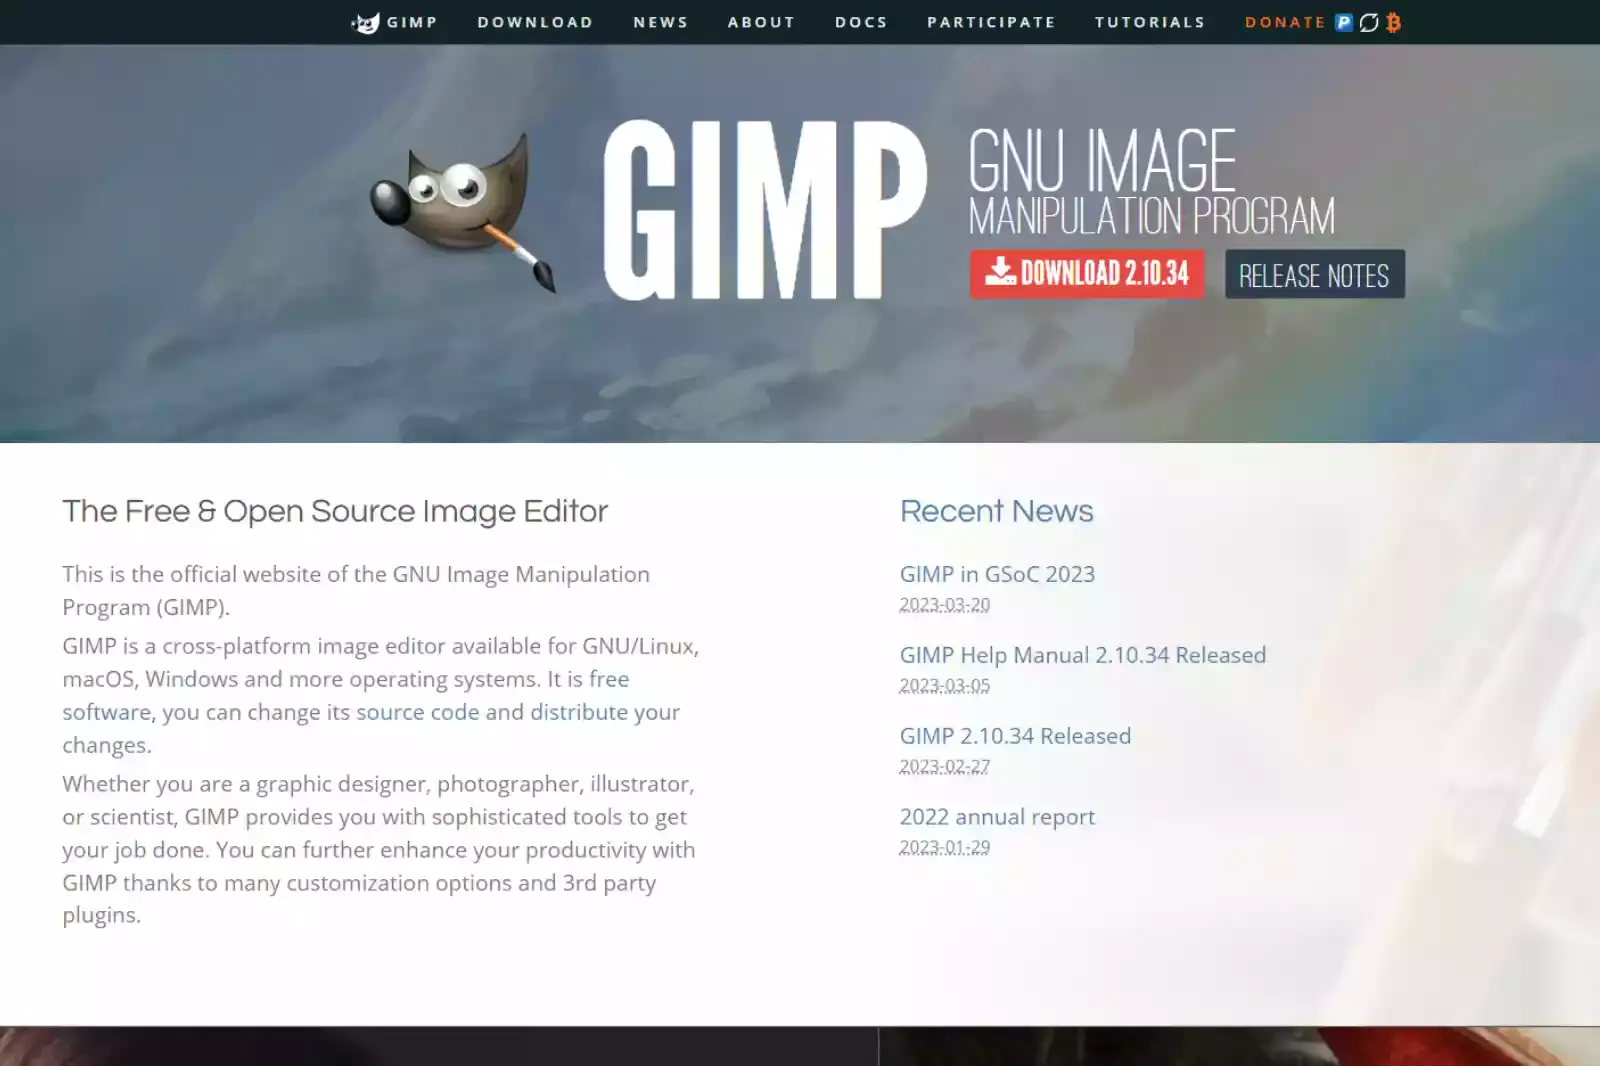 Home Page of GIMP